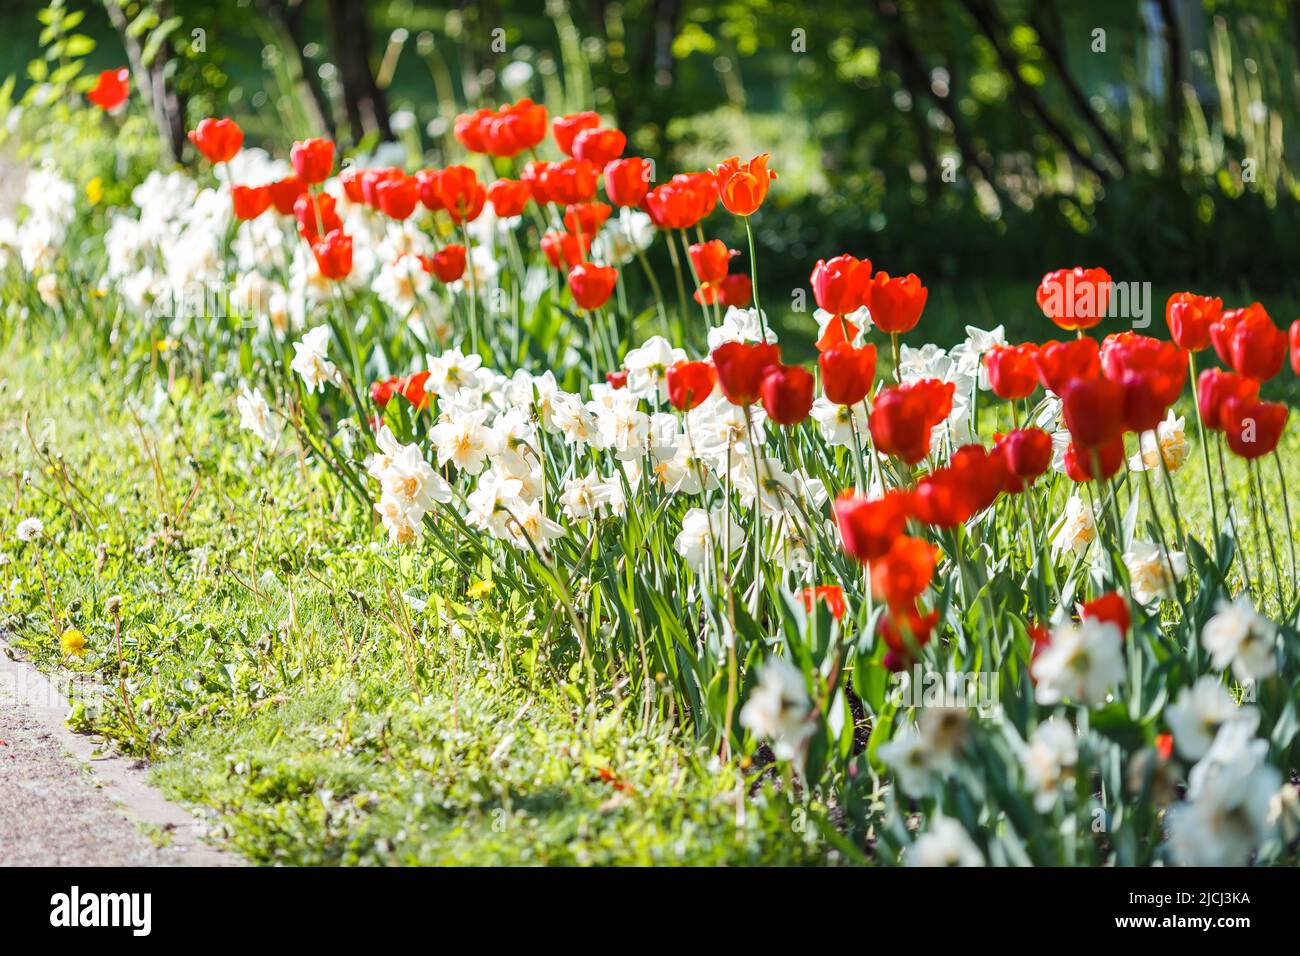 Flower bed with opened red tulips and white daffodils, in spring on a sunny day. Stock Photo